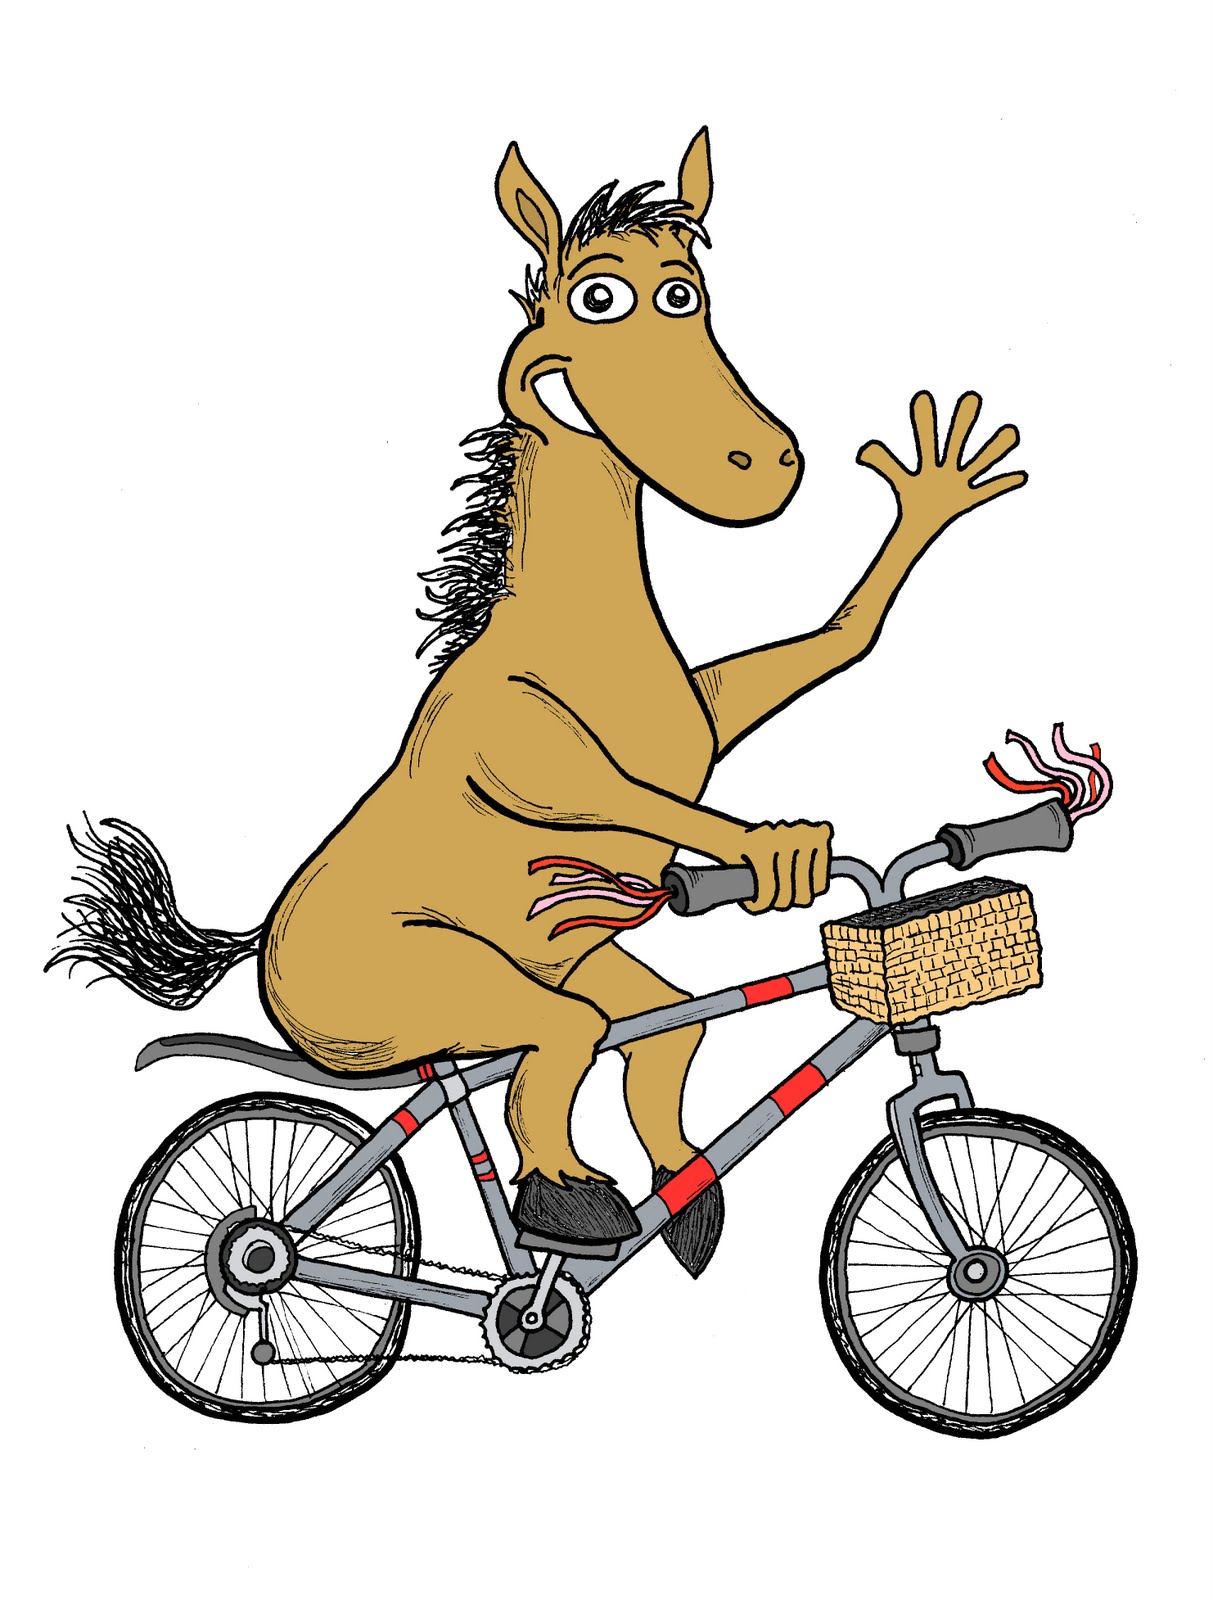 Horse-with-Hands-on-a-Bike.jpg